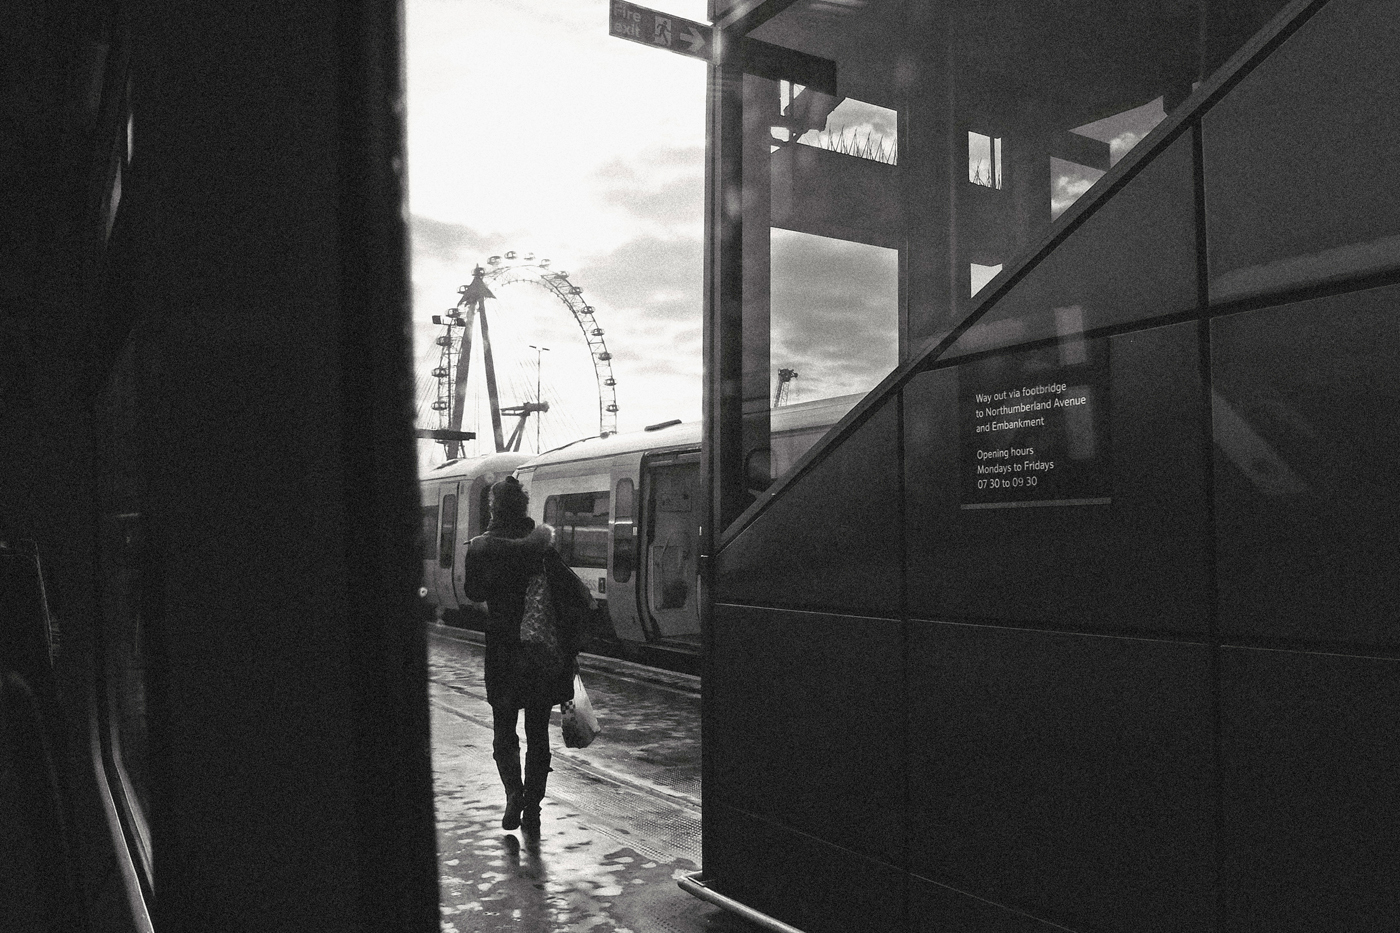 London Notes with Fuji X30 and Olympus E-M5